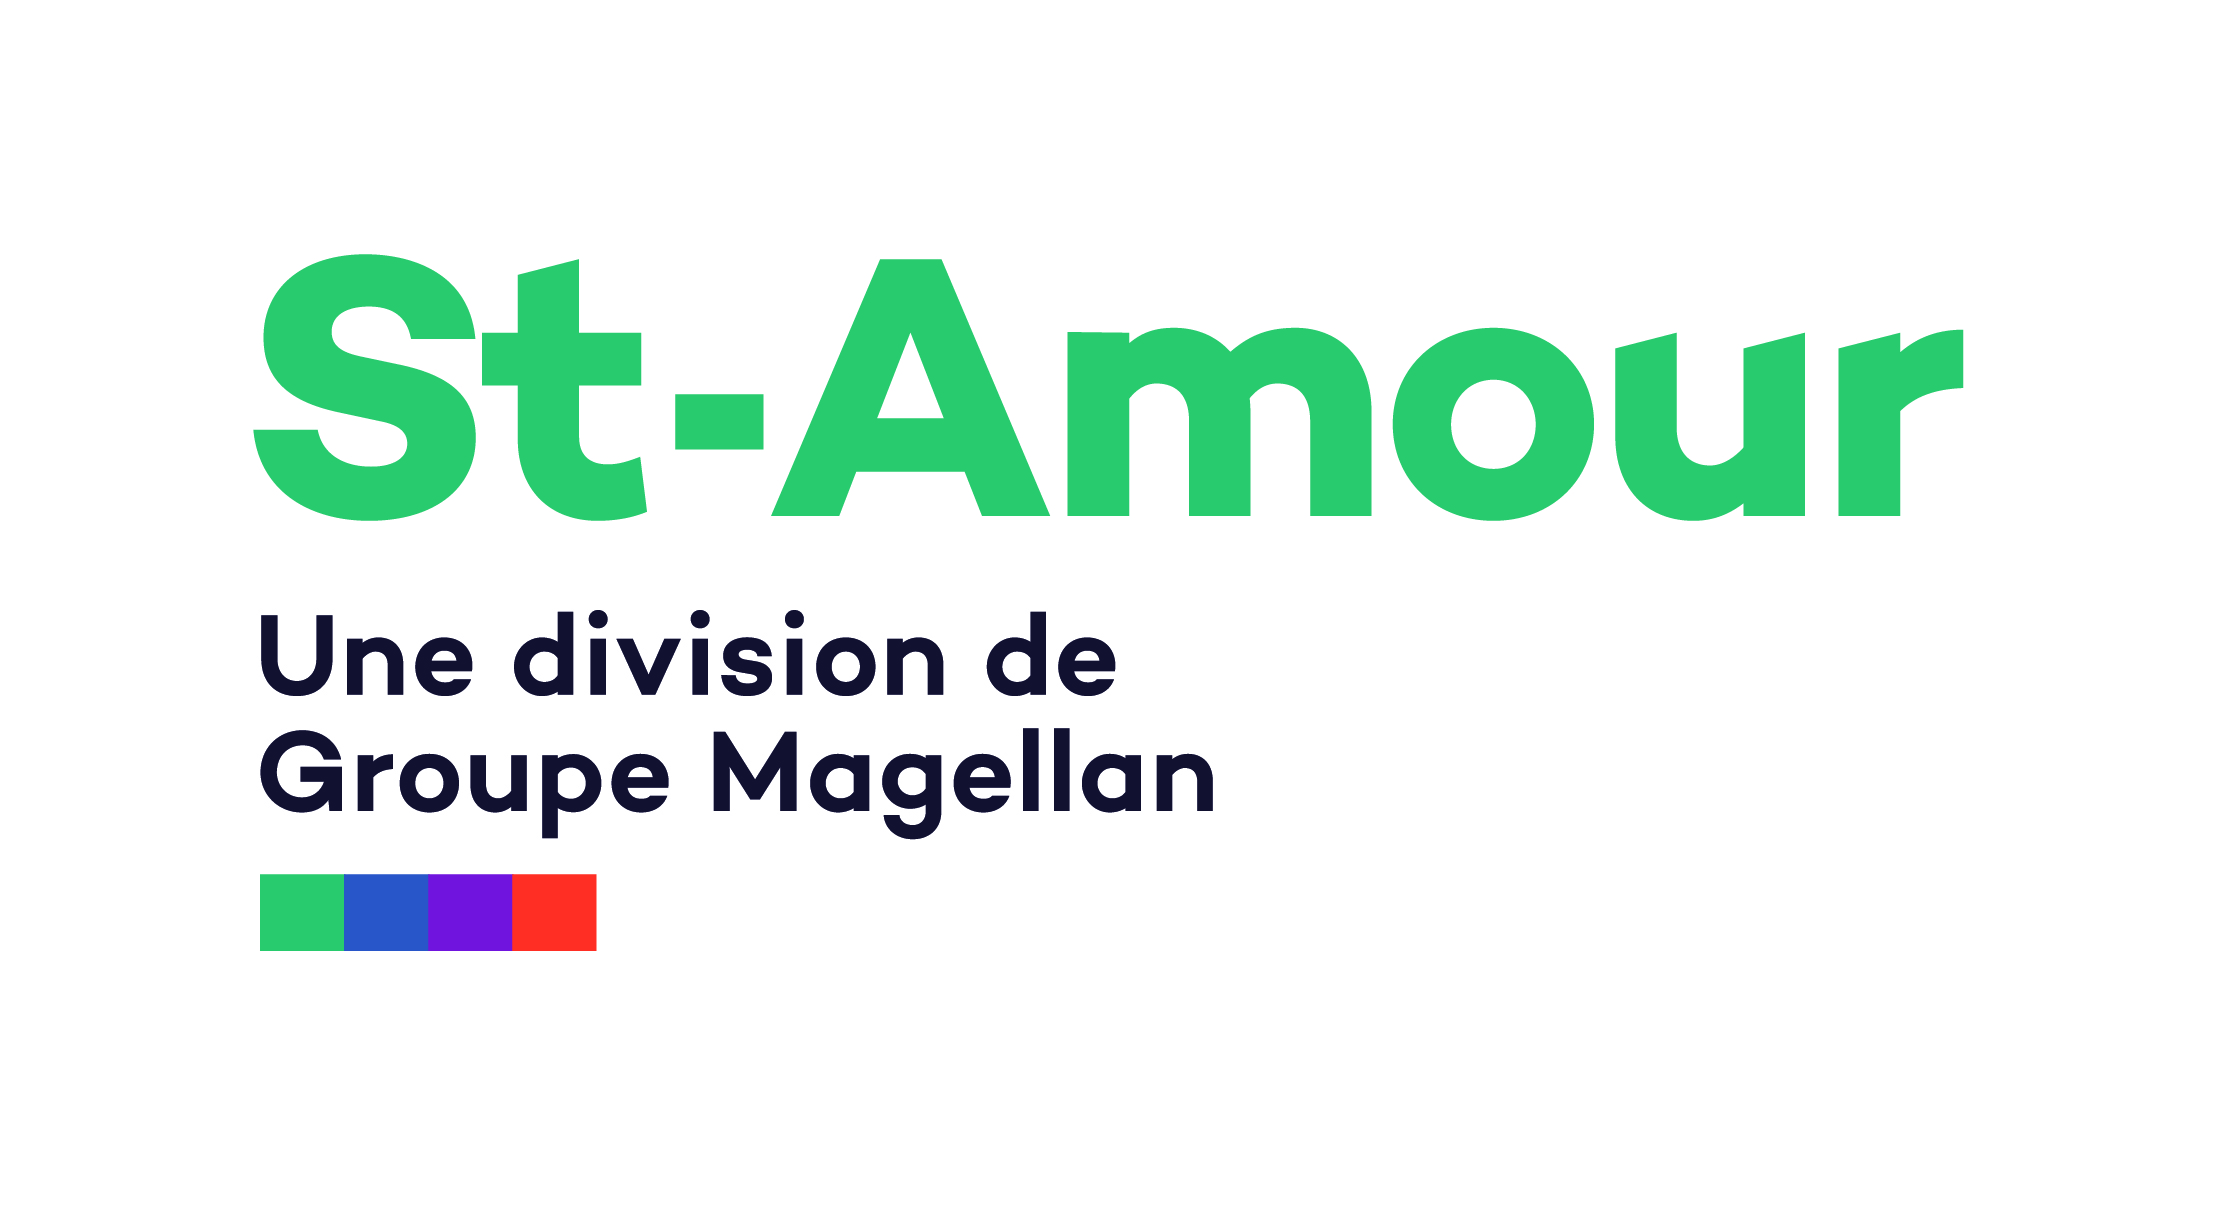 Groupe Magellan / St-Amour division